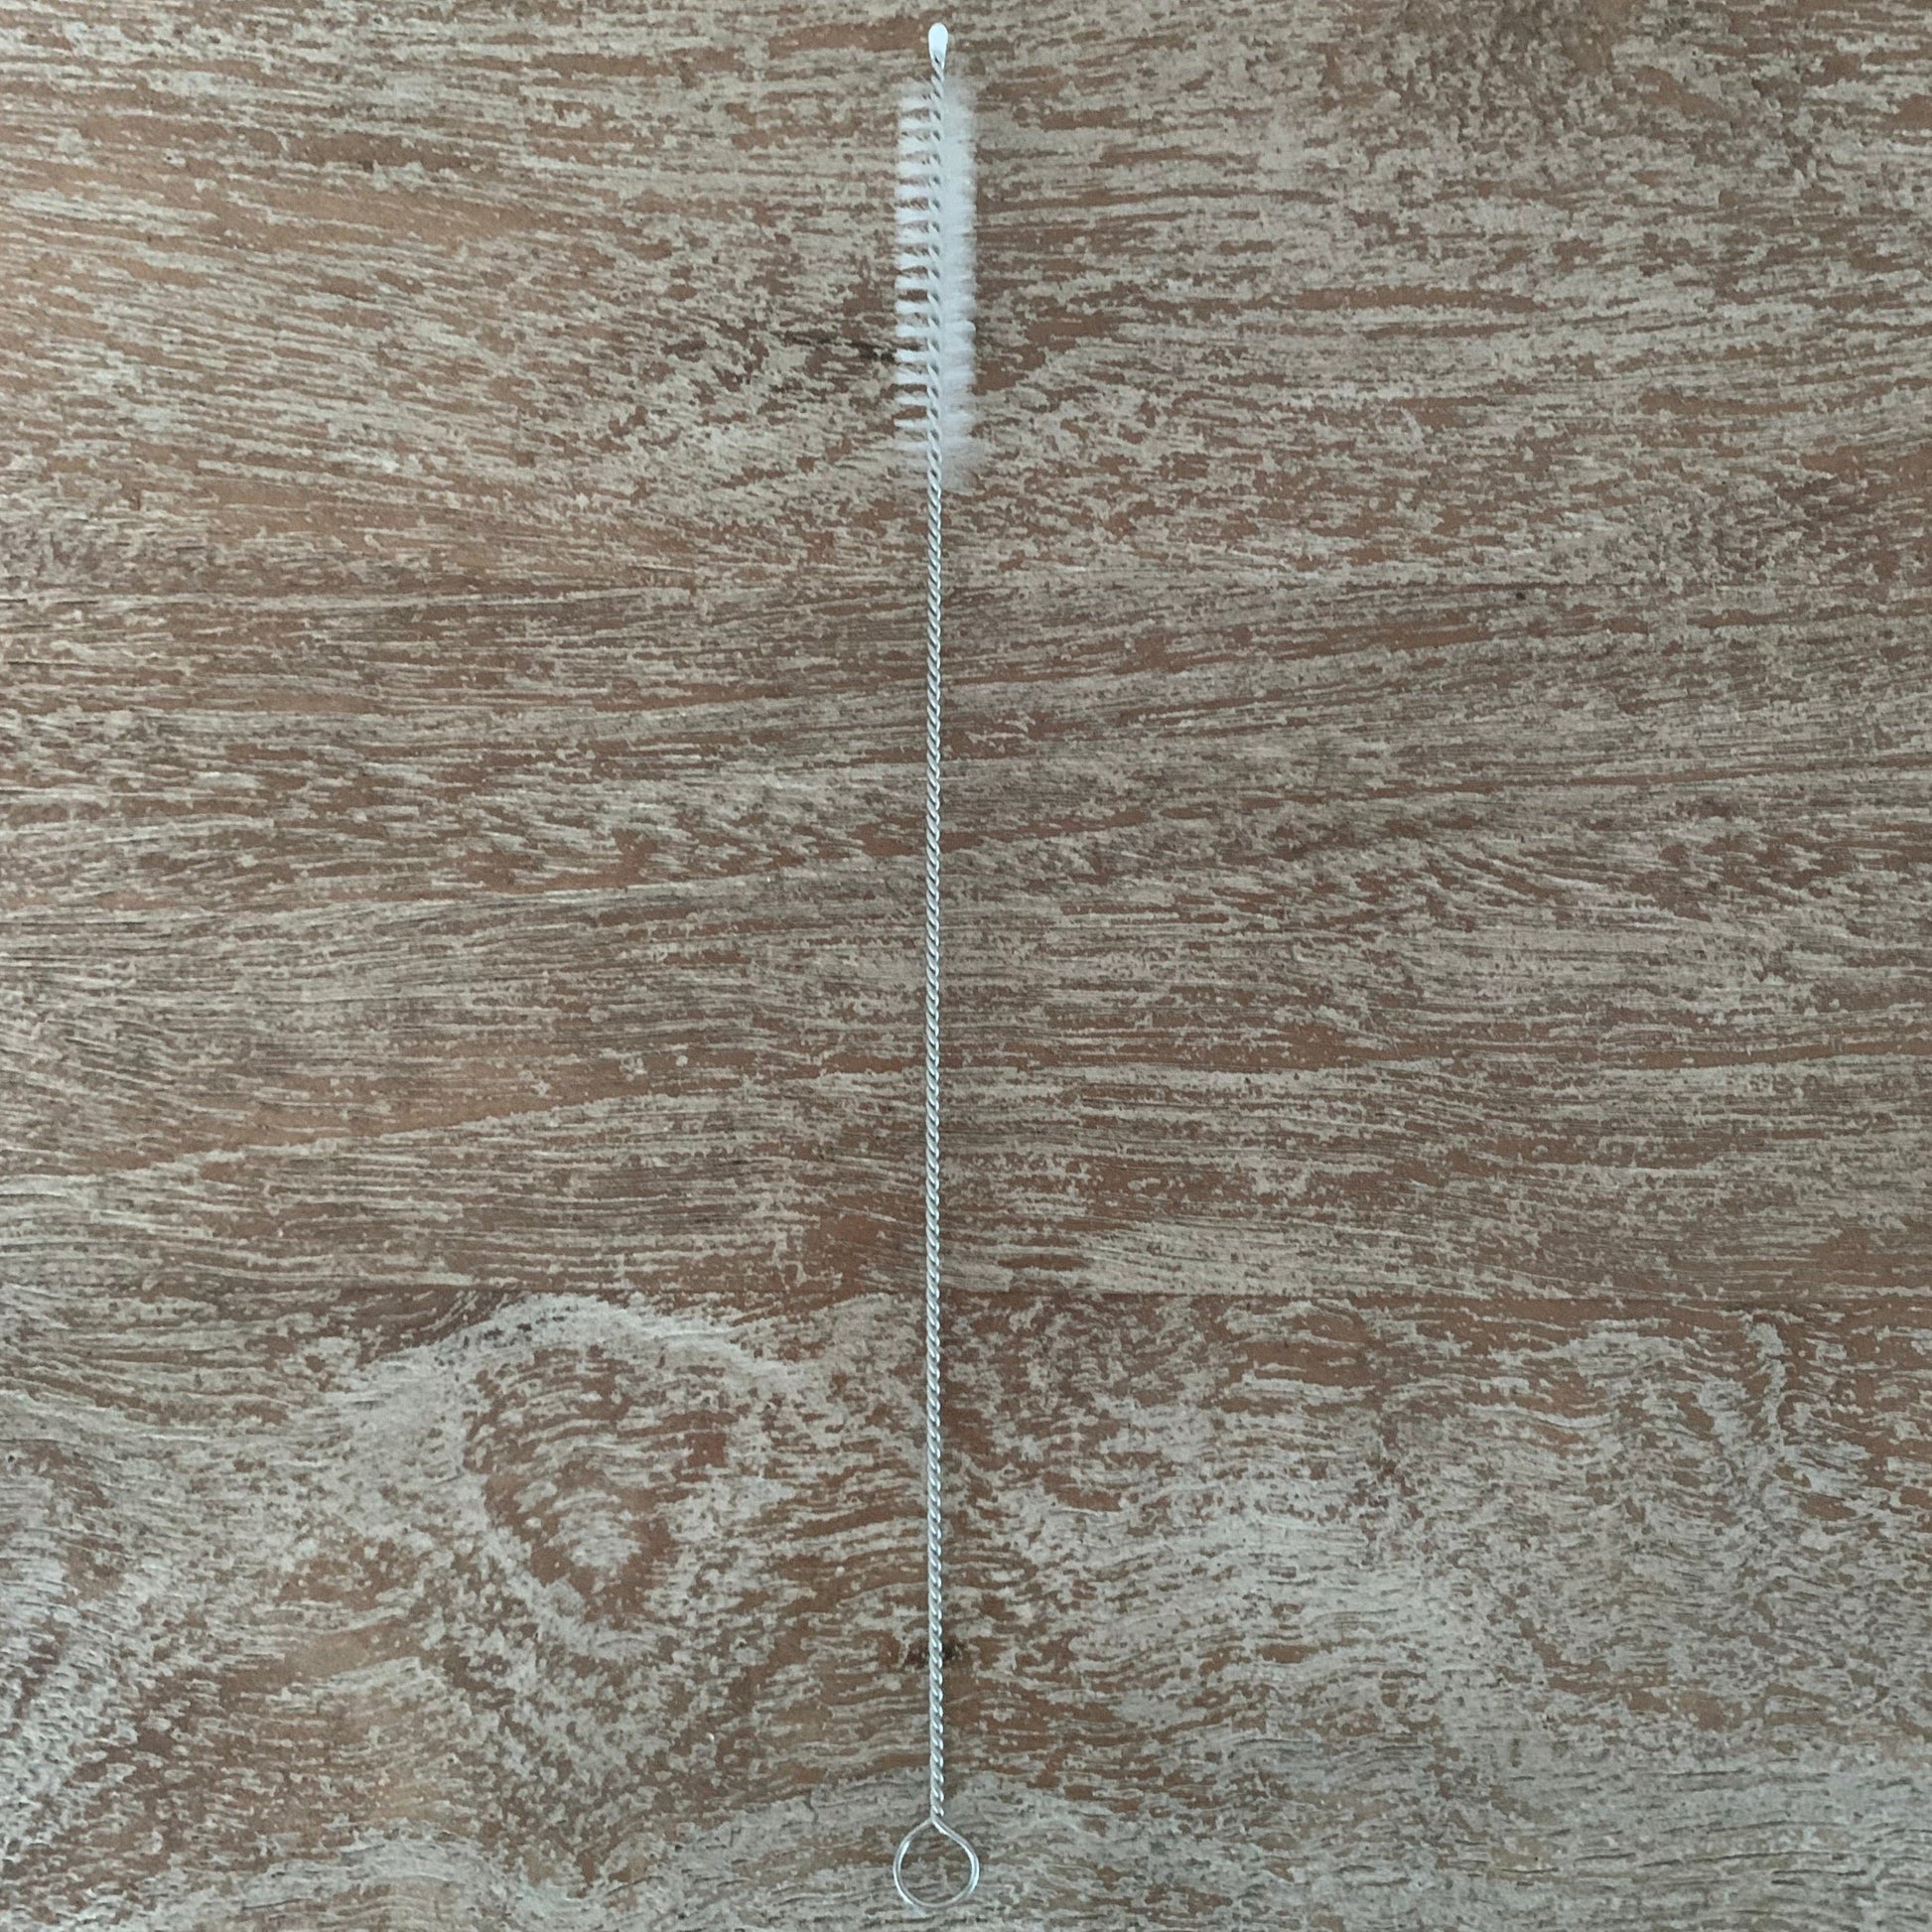 Stainless Steel Reusable Straw Cleaner